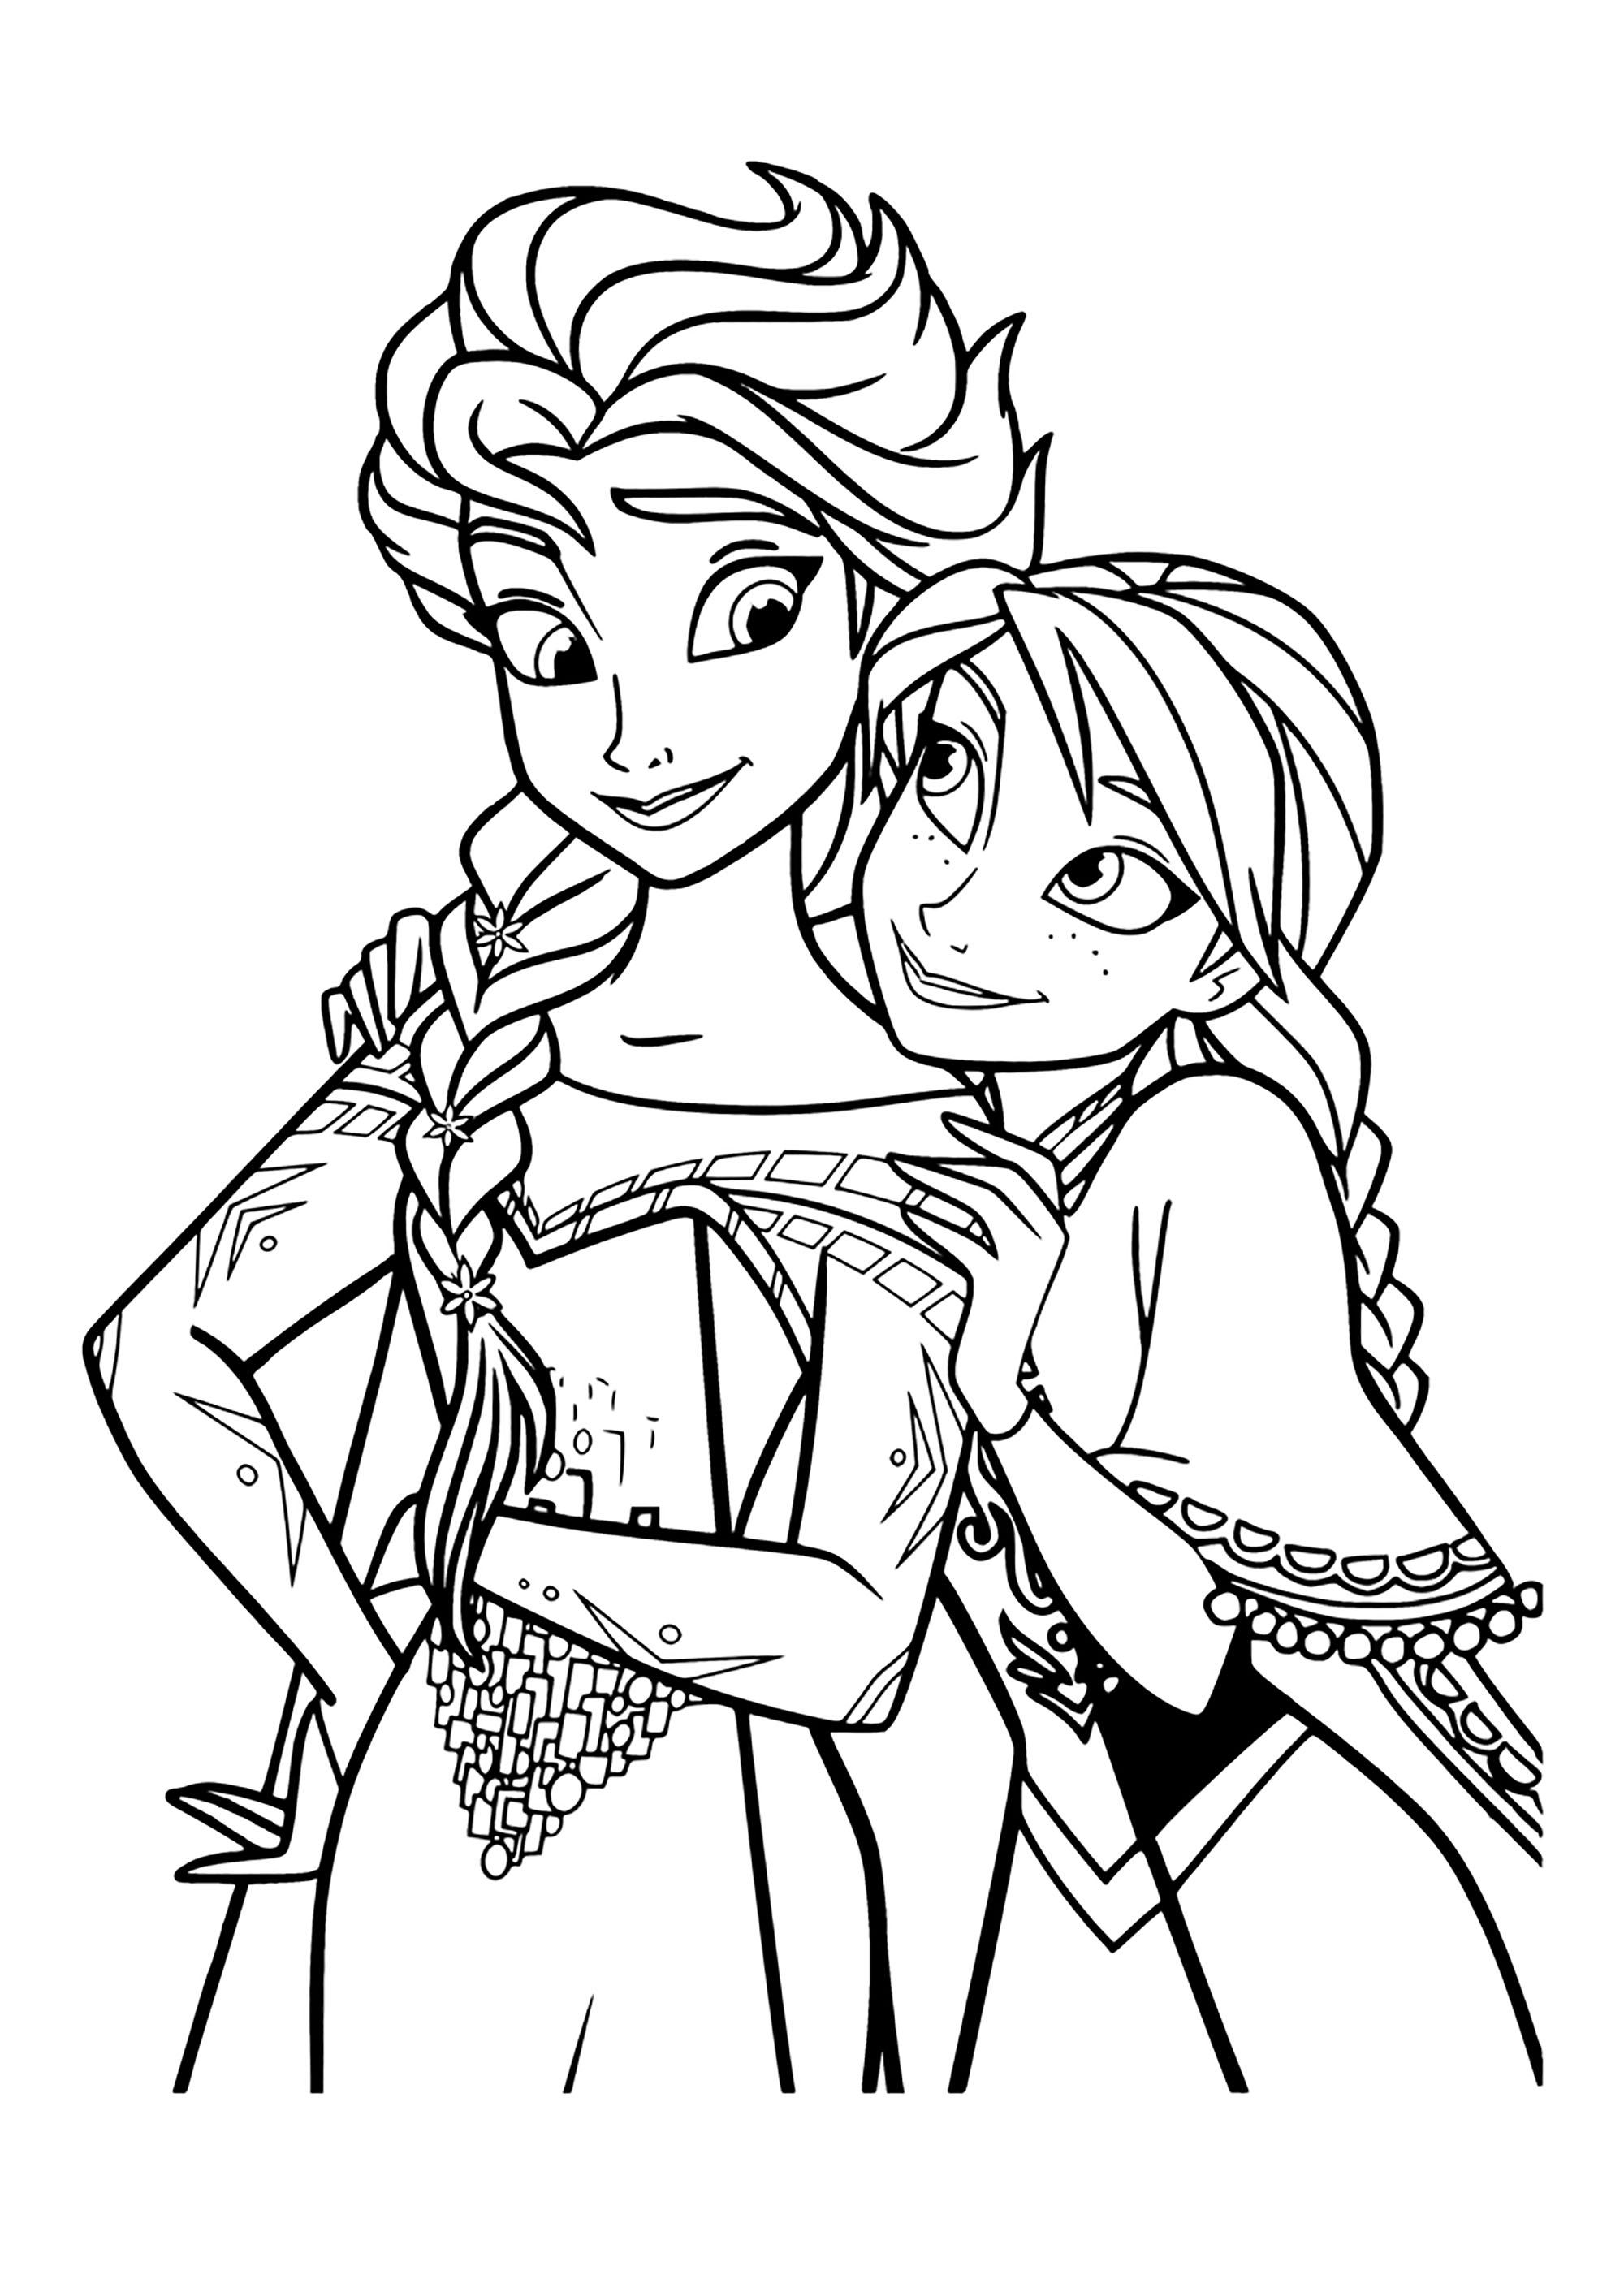 Coloring Pages For Kids Frozen 2 - We are happy to present coloring ...